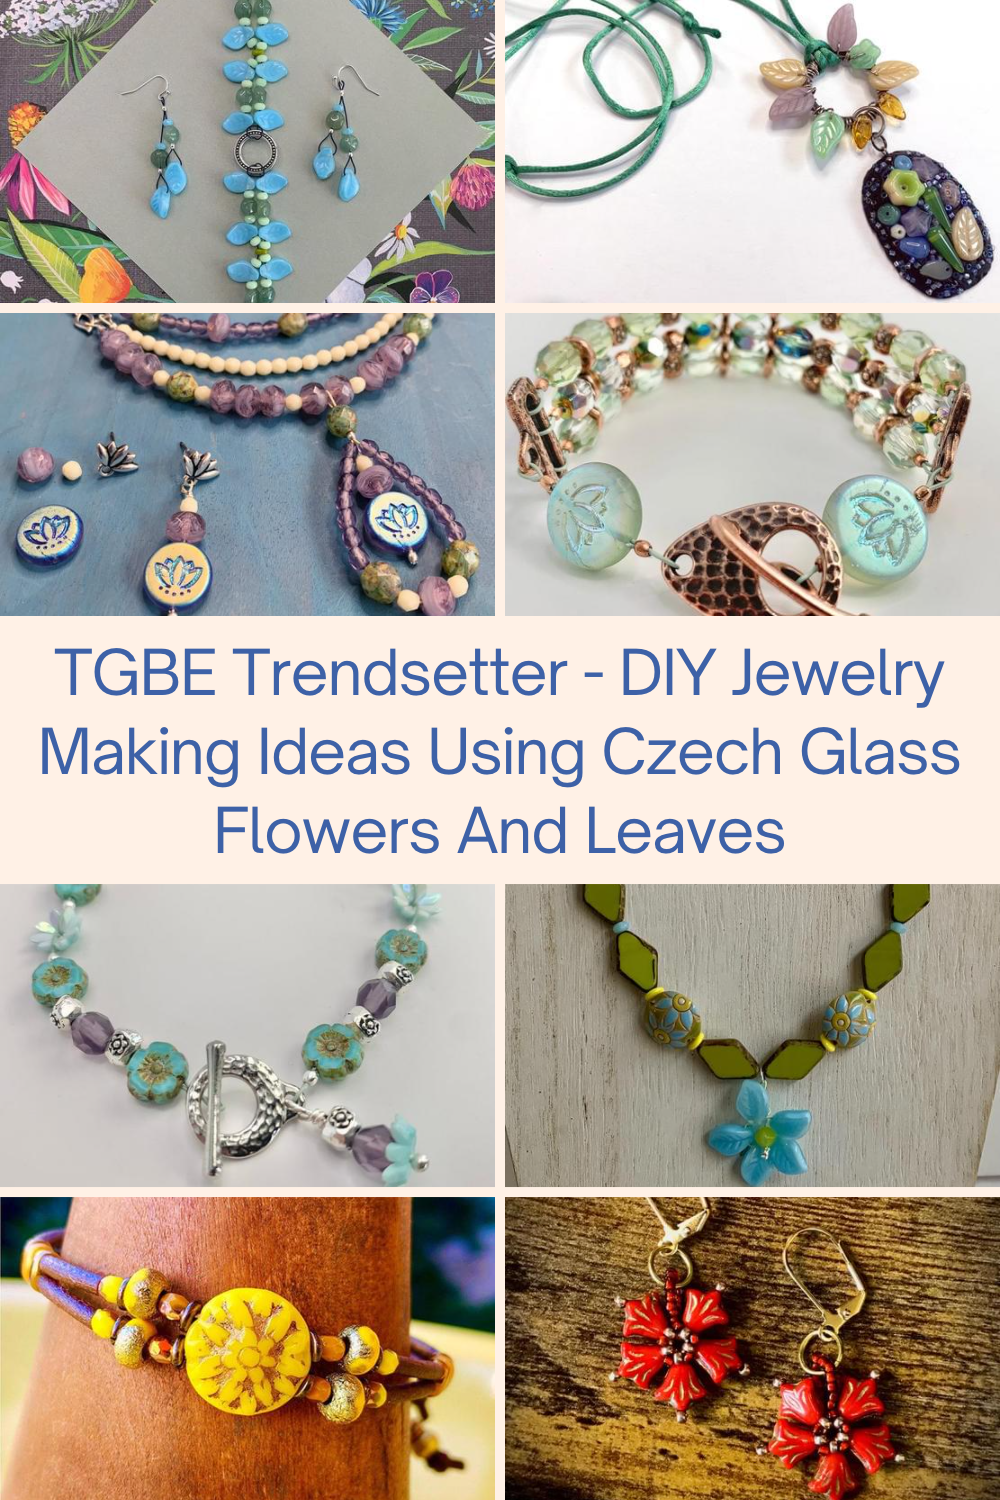 TGBE Trendsetter - DIY Jewelry Making Ideas Using Czech Glass Flowers And Leaves Collage